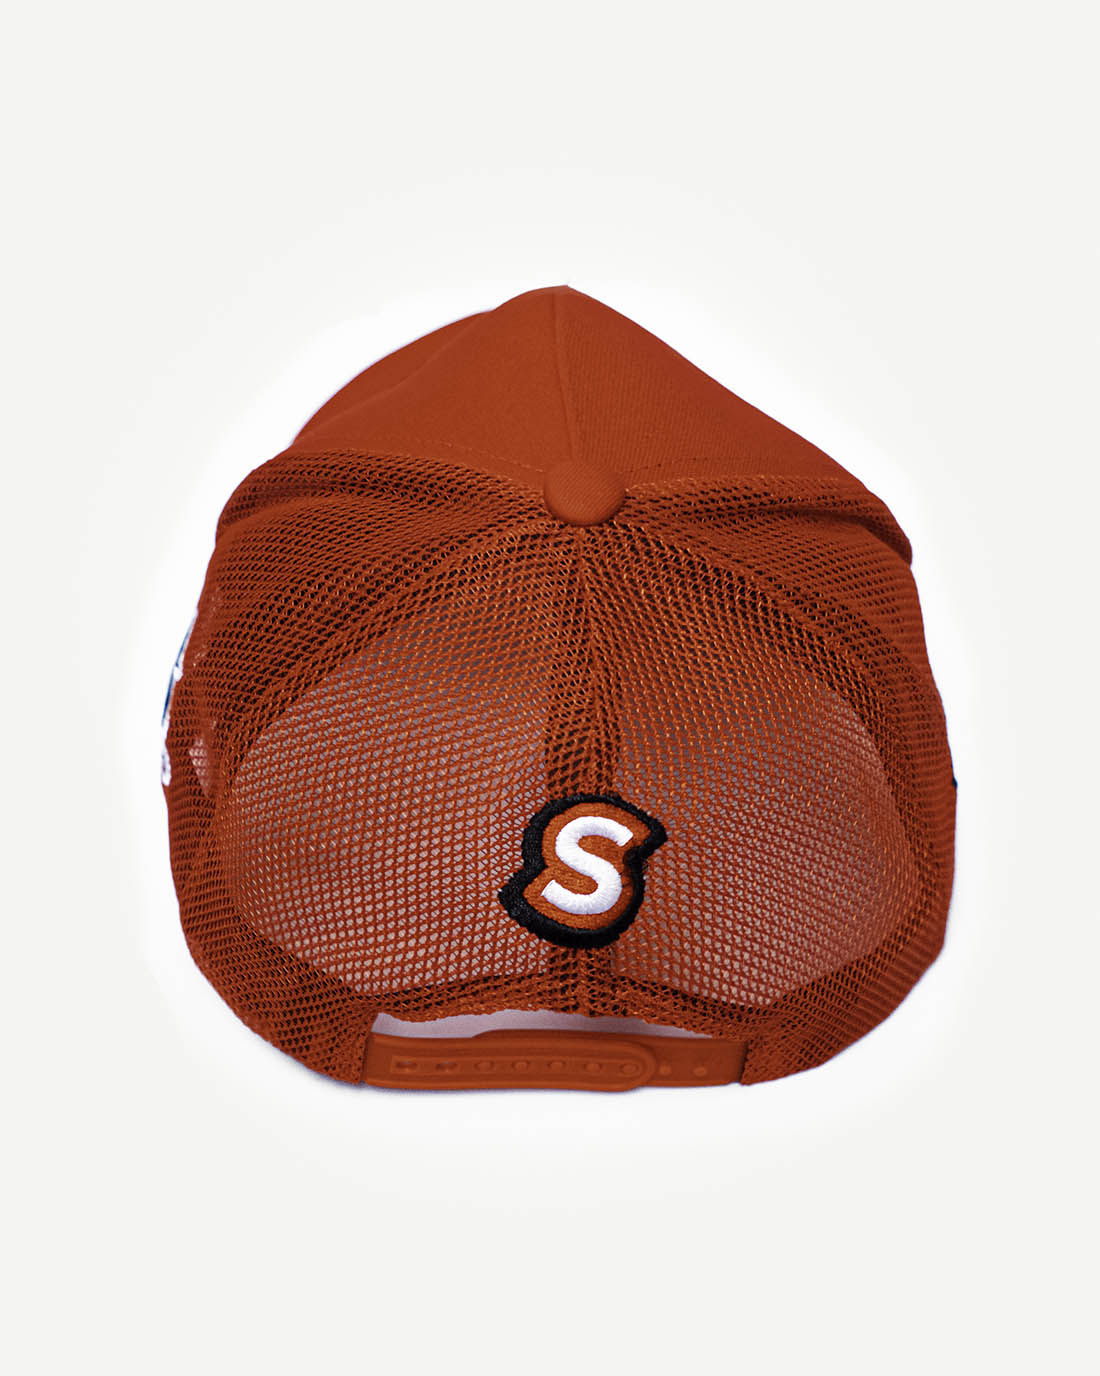 Rear side view of a sporty red snapback hat with trendy racing-inspired embroidered design and cooling mesh back.